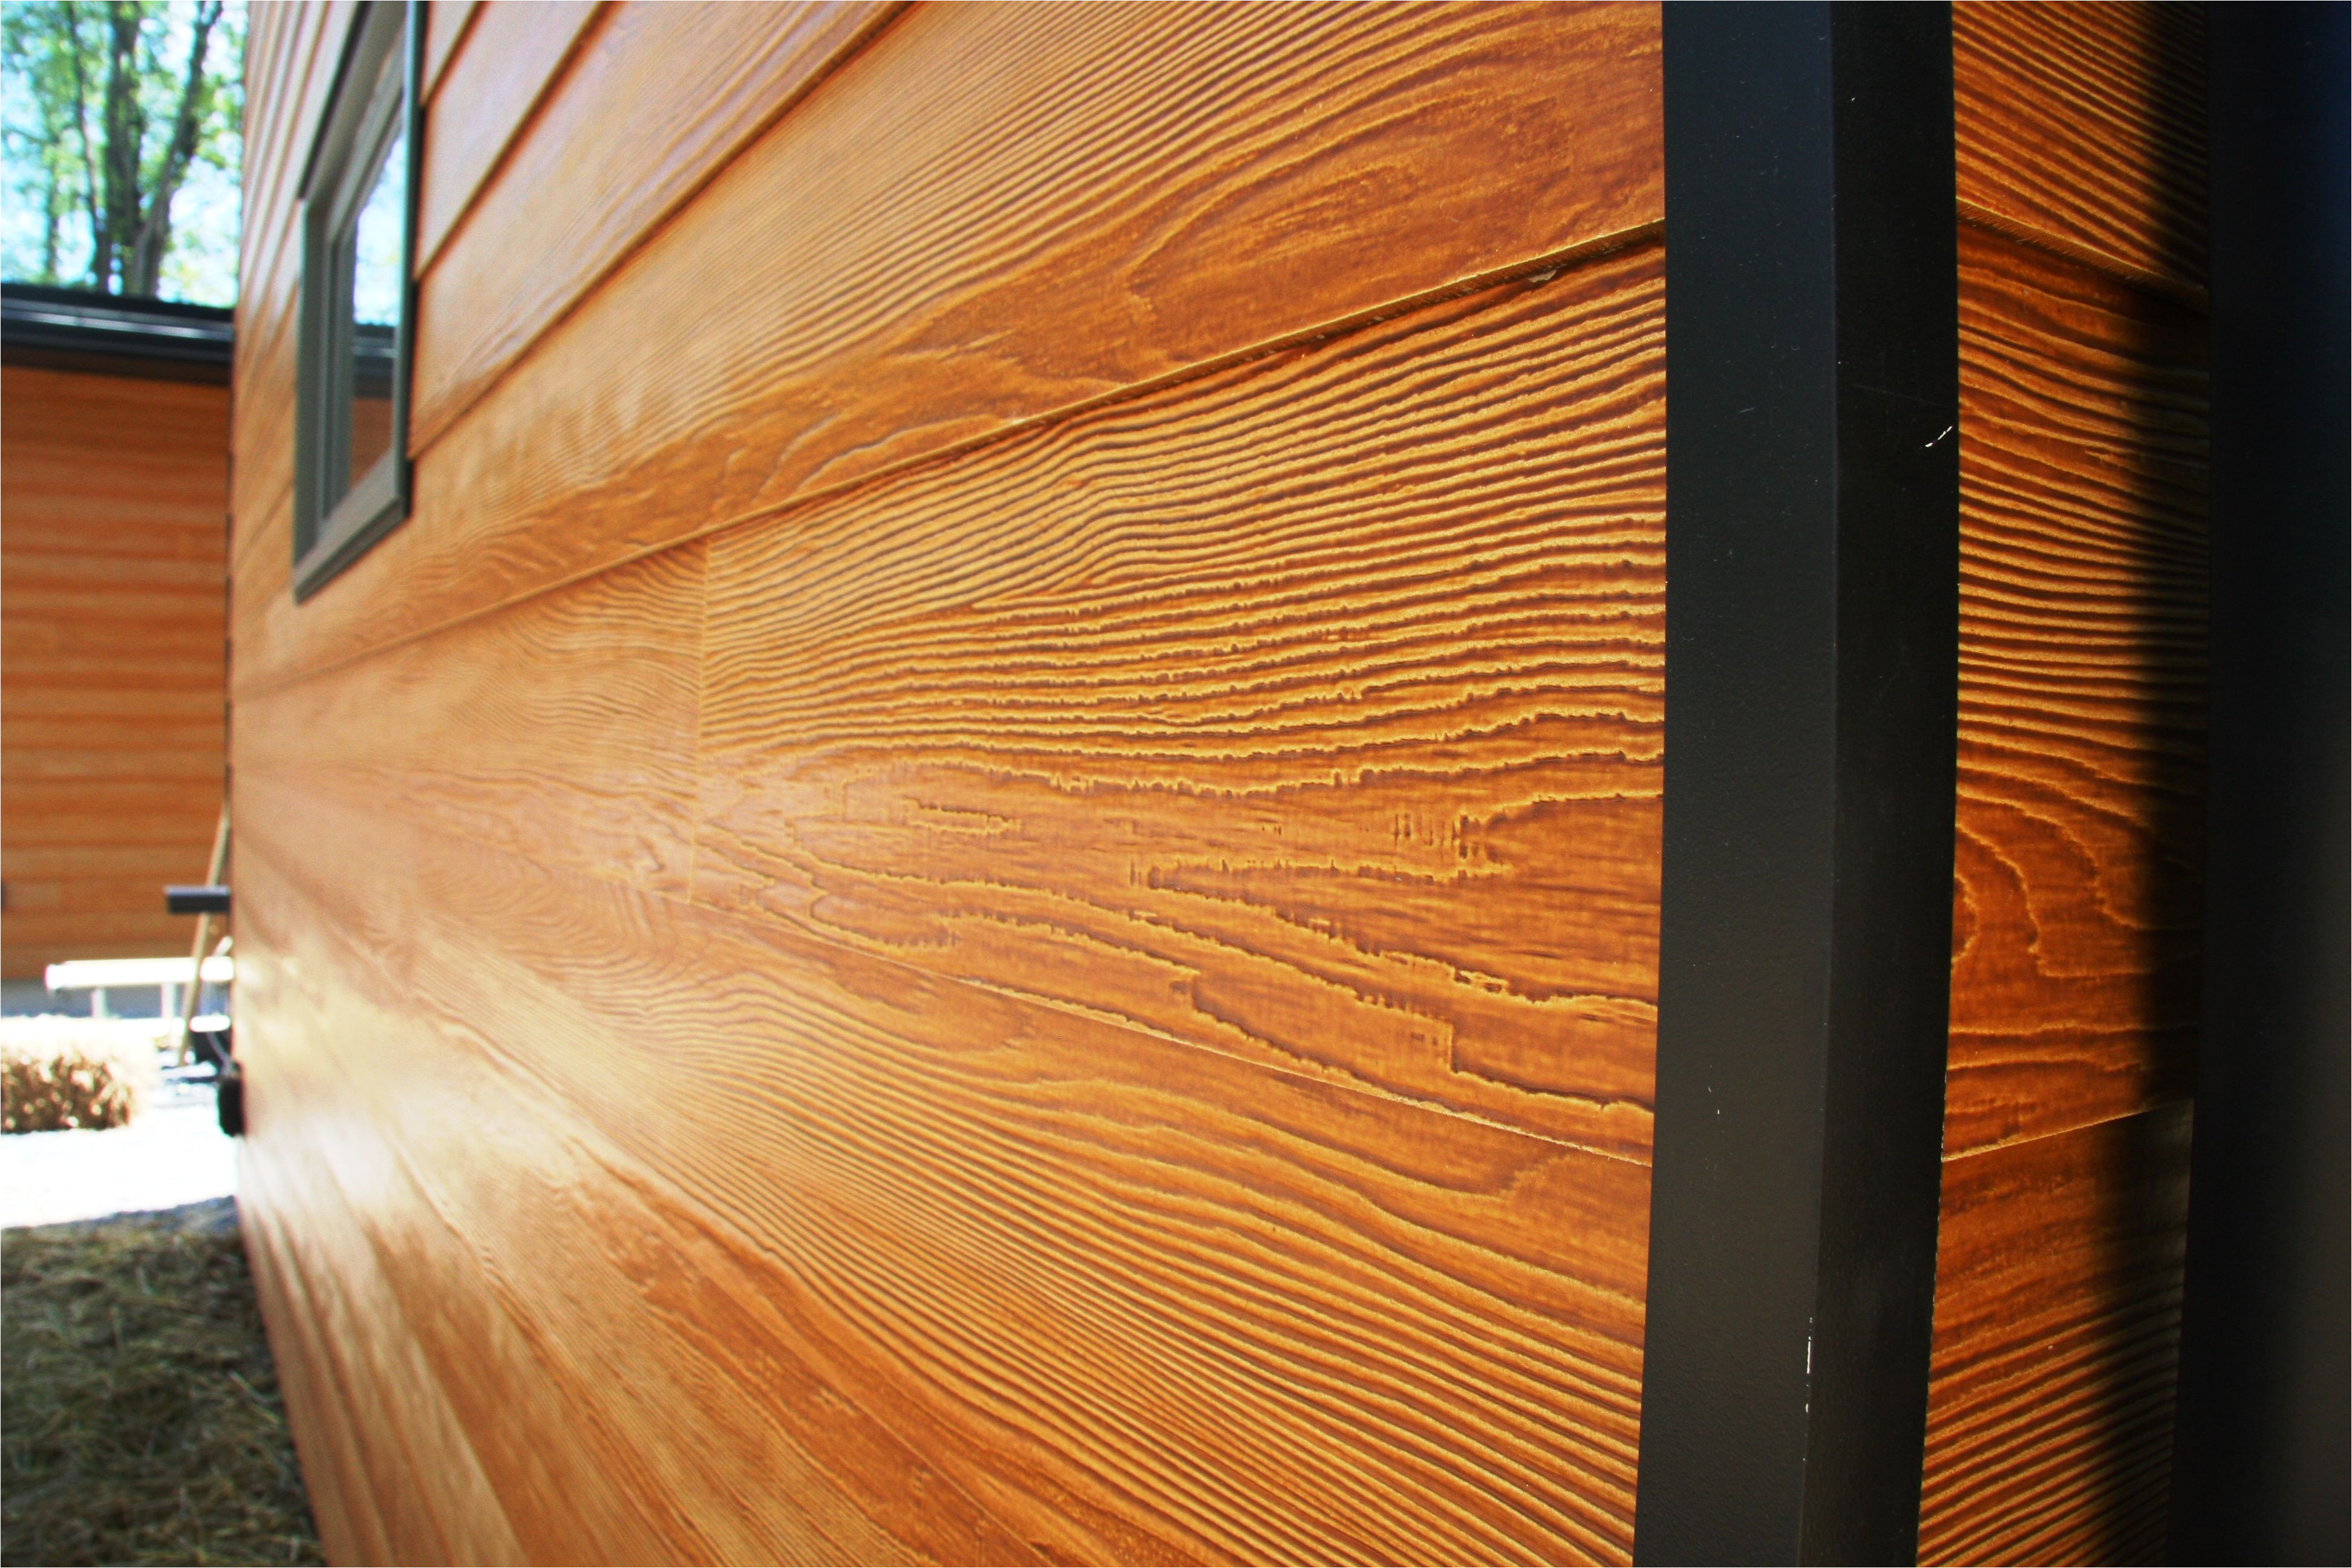 certainteed fiber cement siding closeup view cedar or maple stain source doesn t list finish